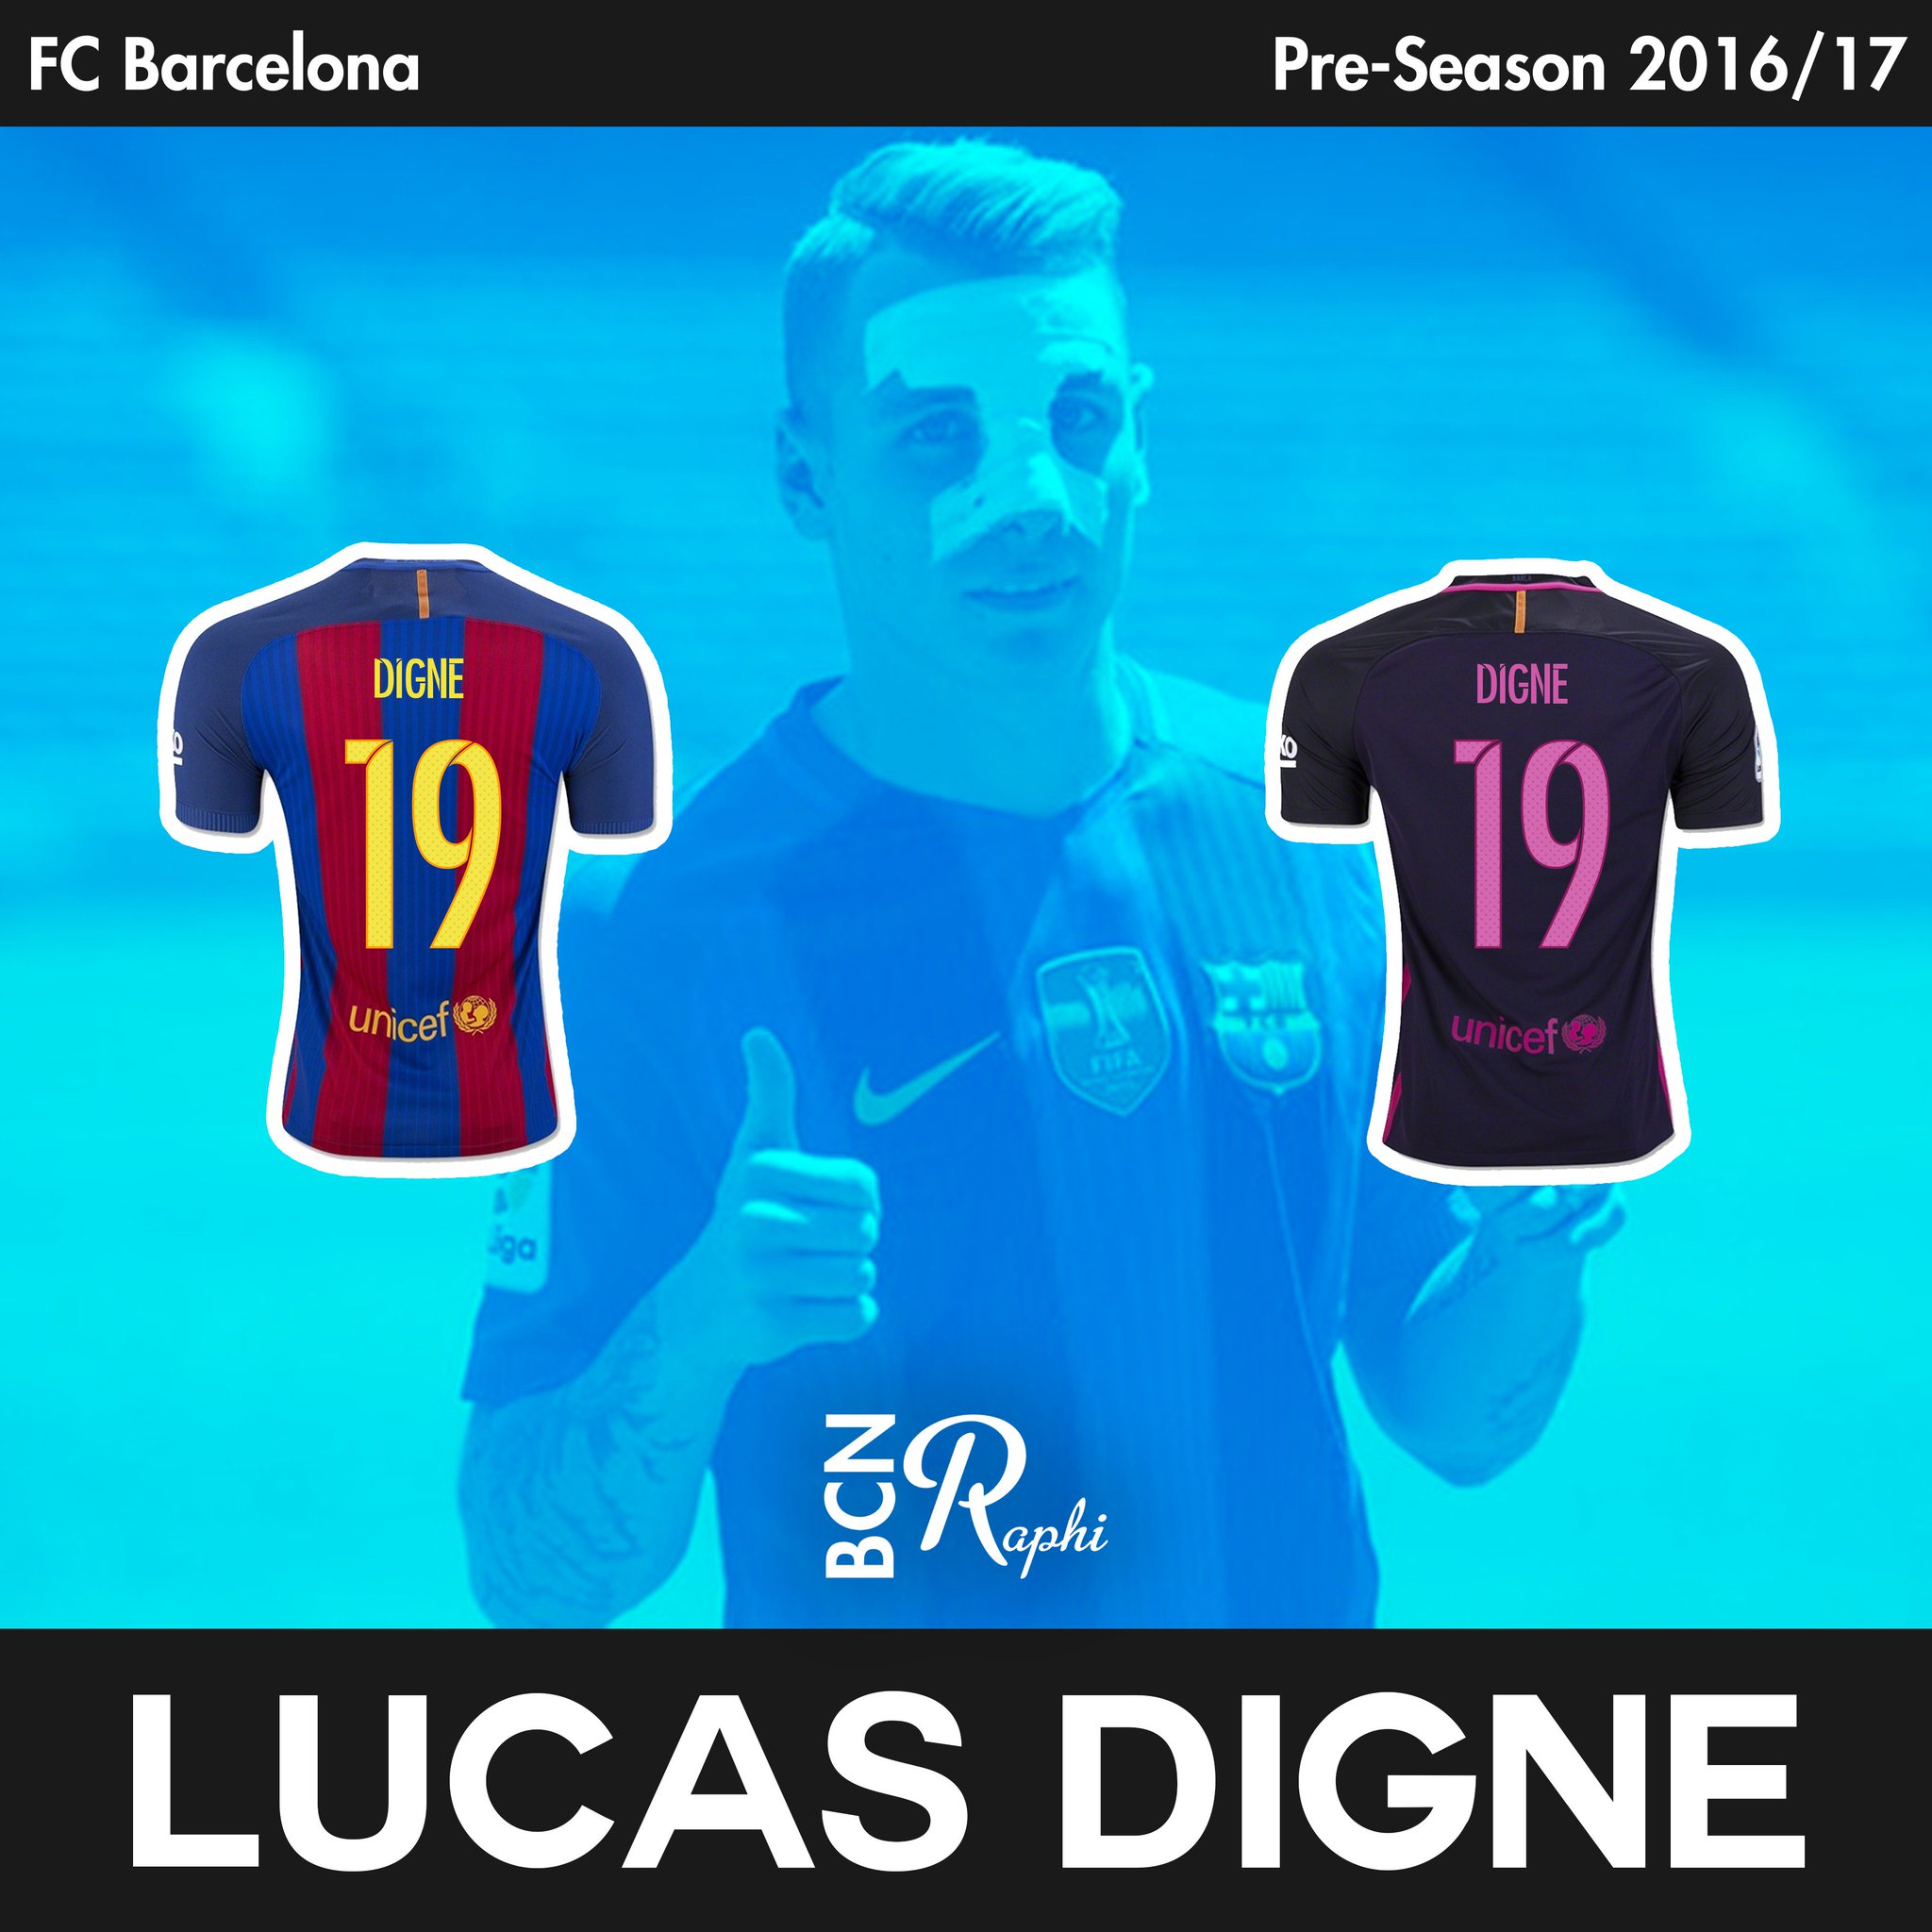 digne jersey number